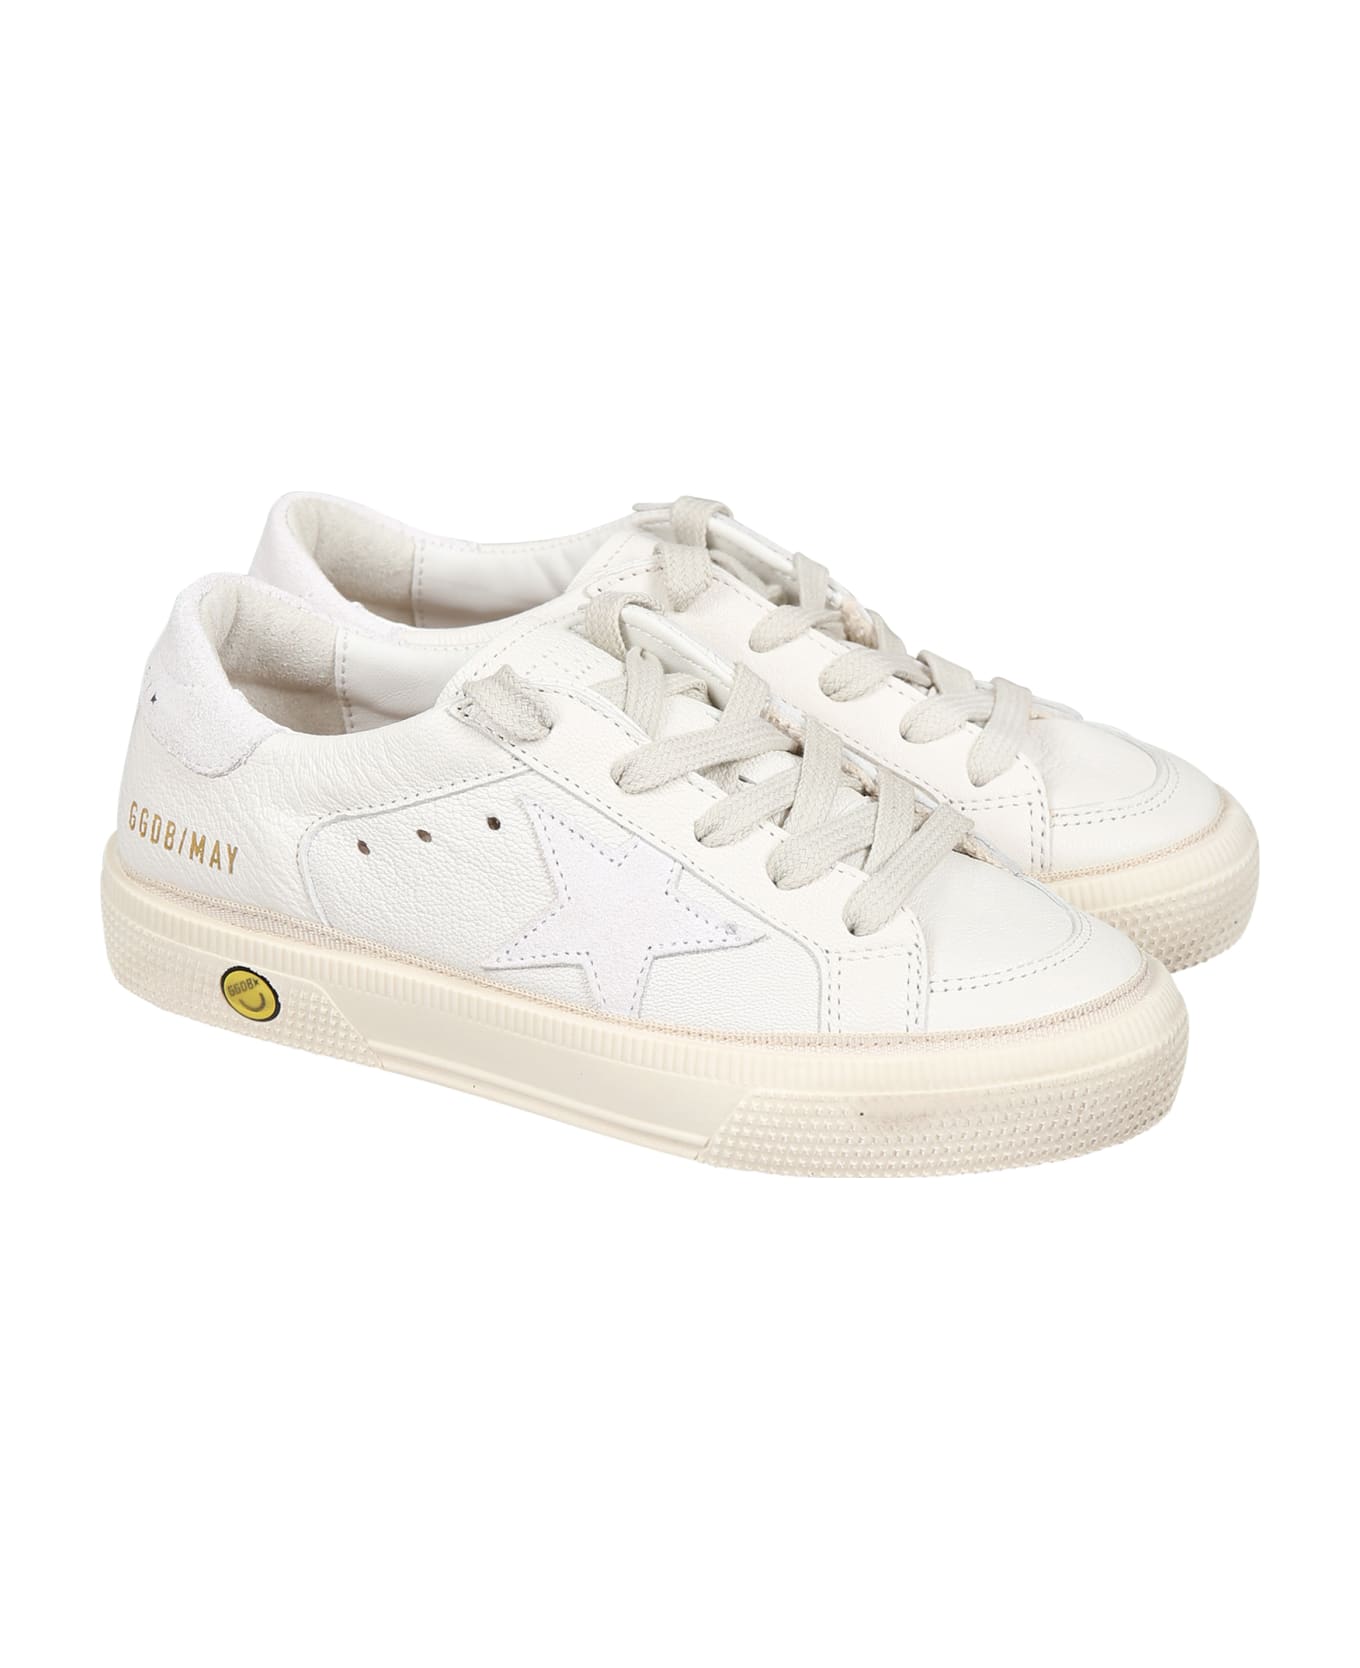 Golden Goose White May Sneakers For Girl With Iconic Star - White